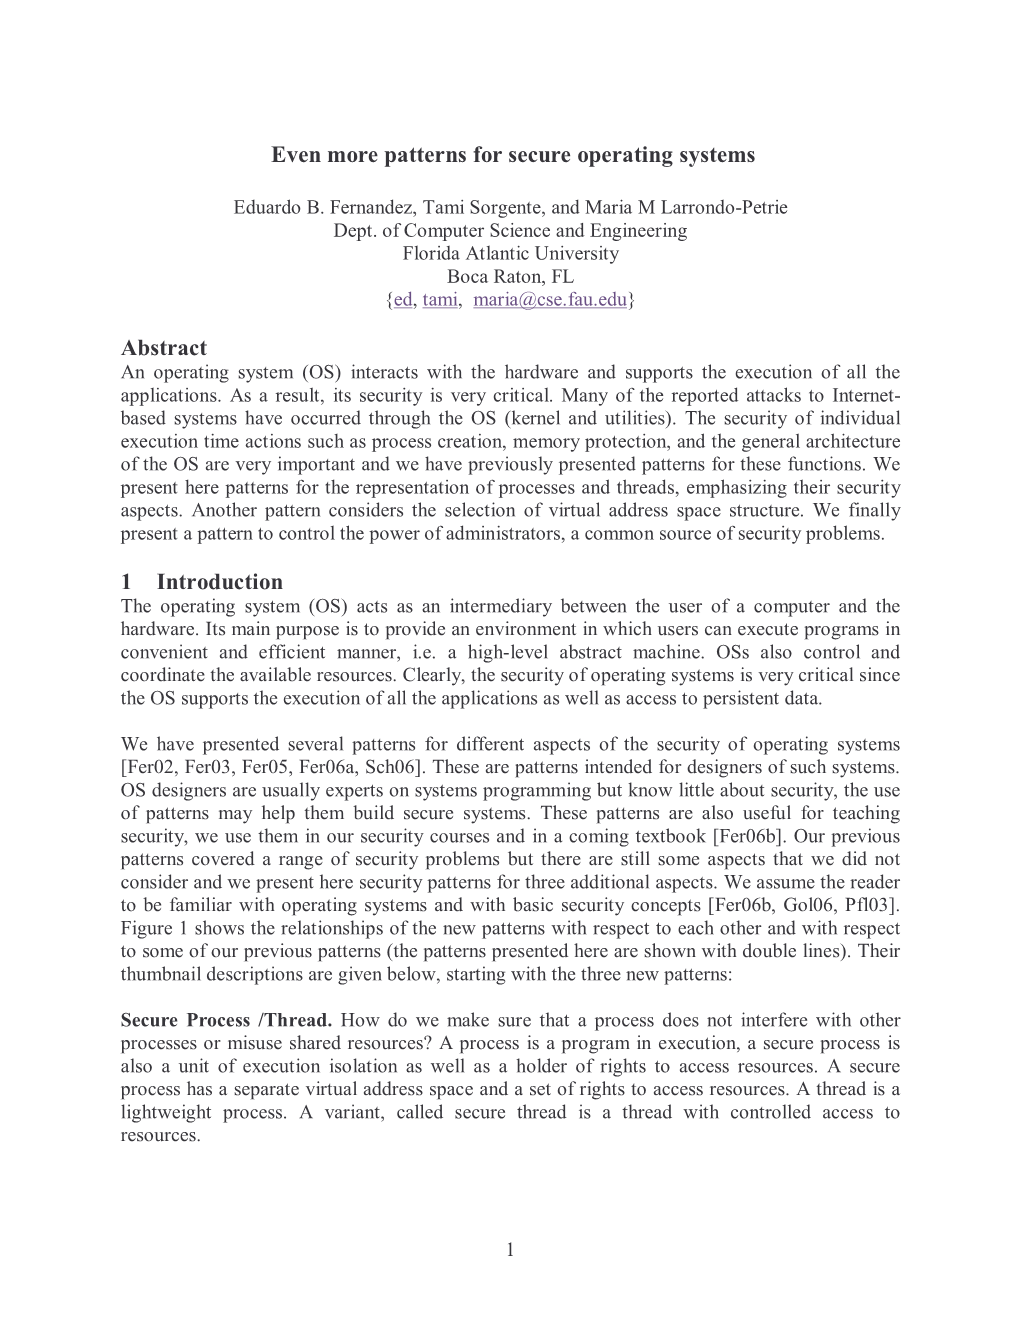 Even More Patterns for Secure Operating Systems Abstract 1